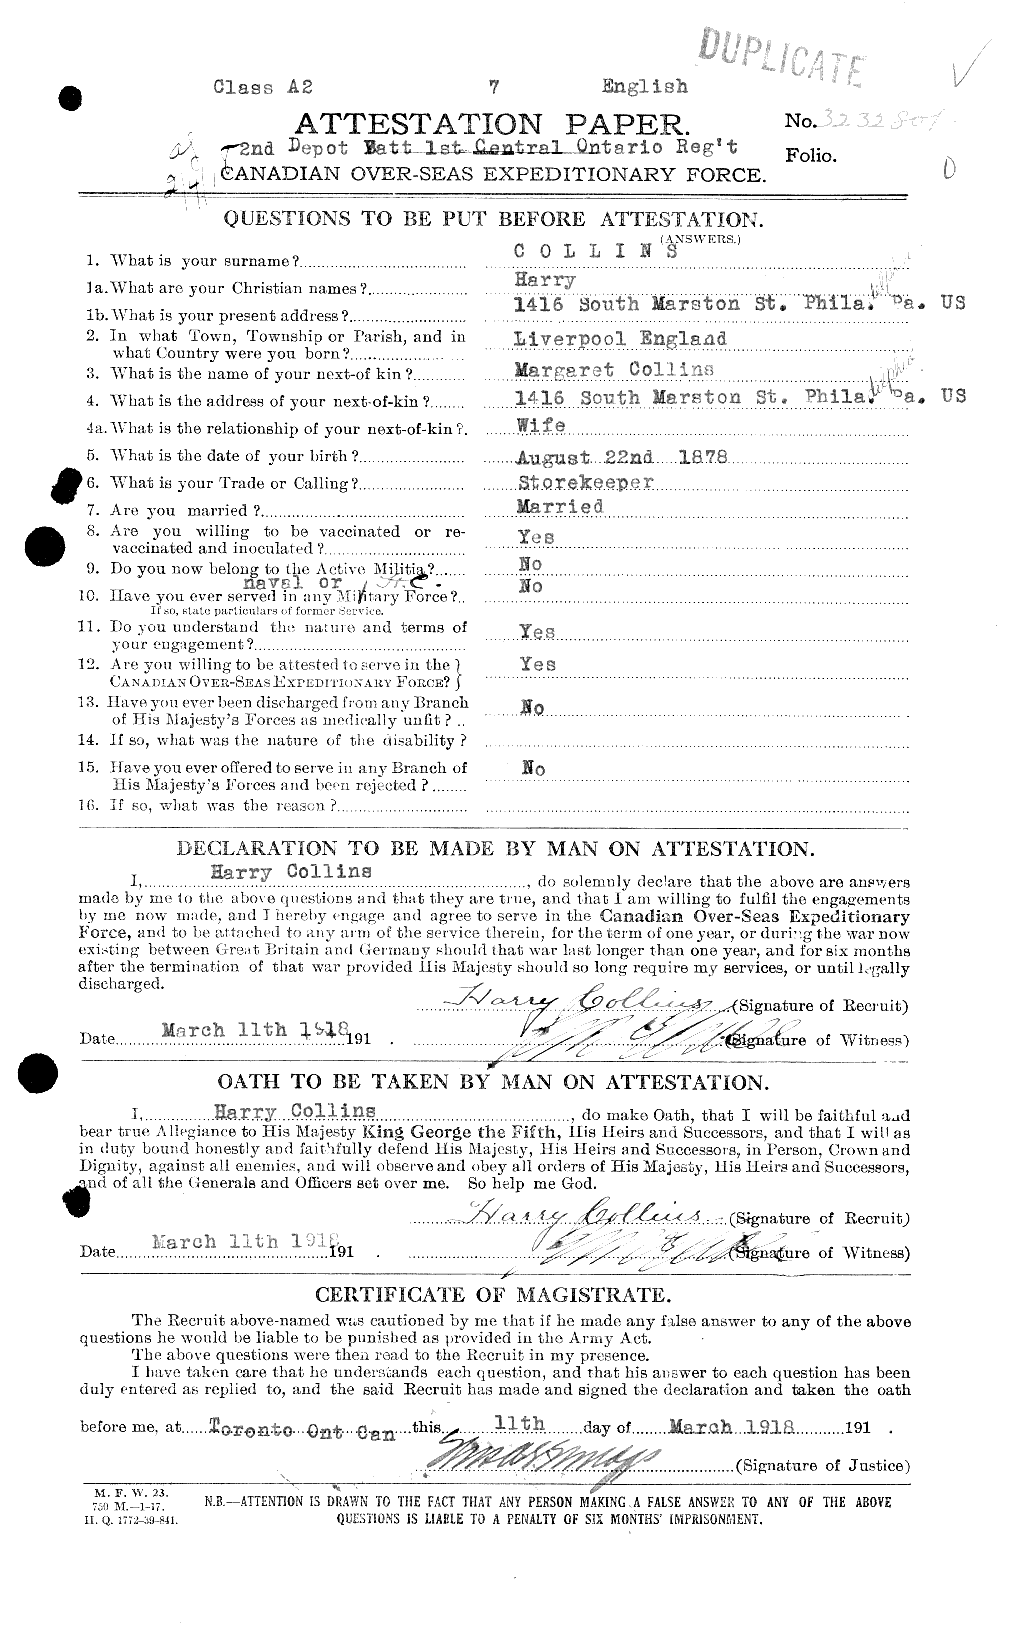 Personnel Records of the First World War - CEF 042267a